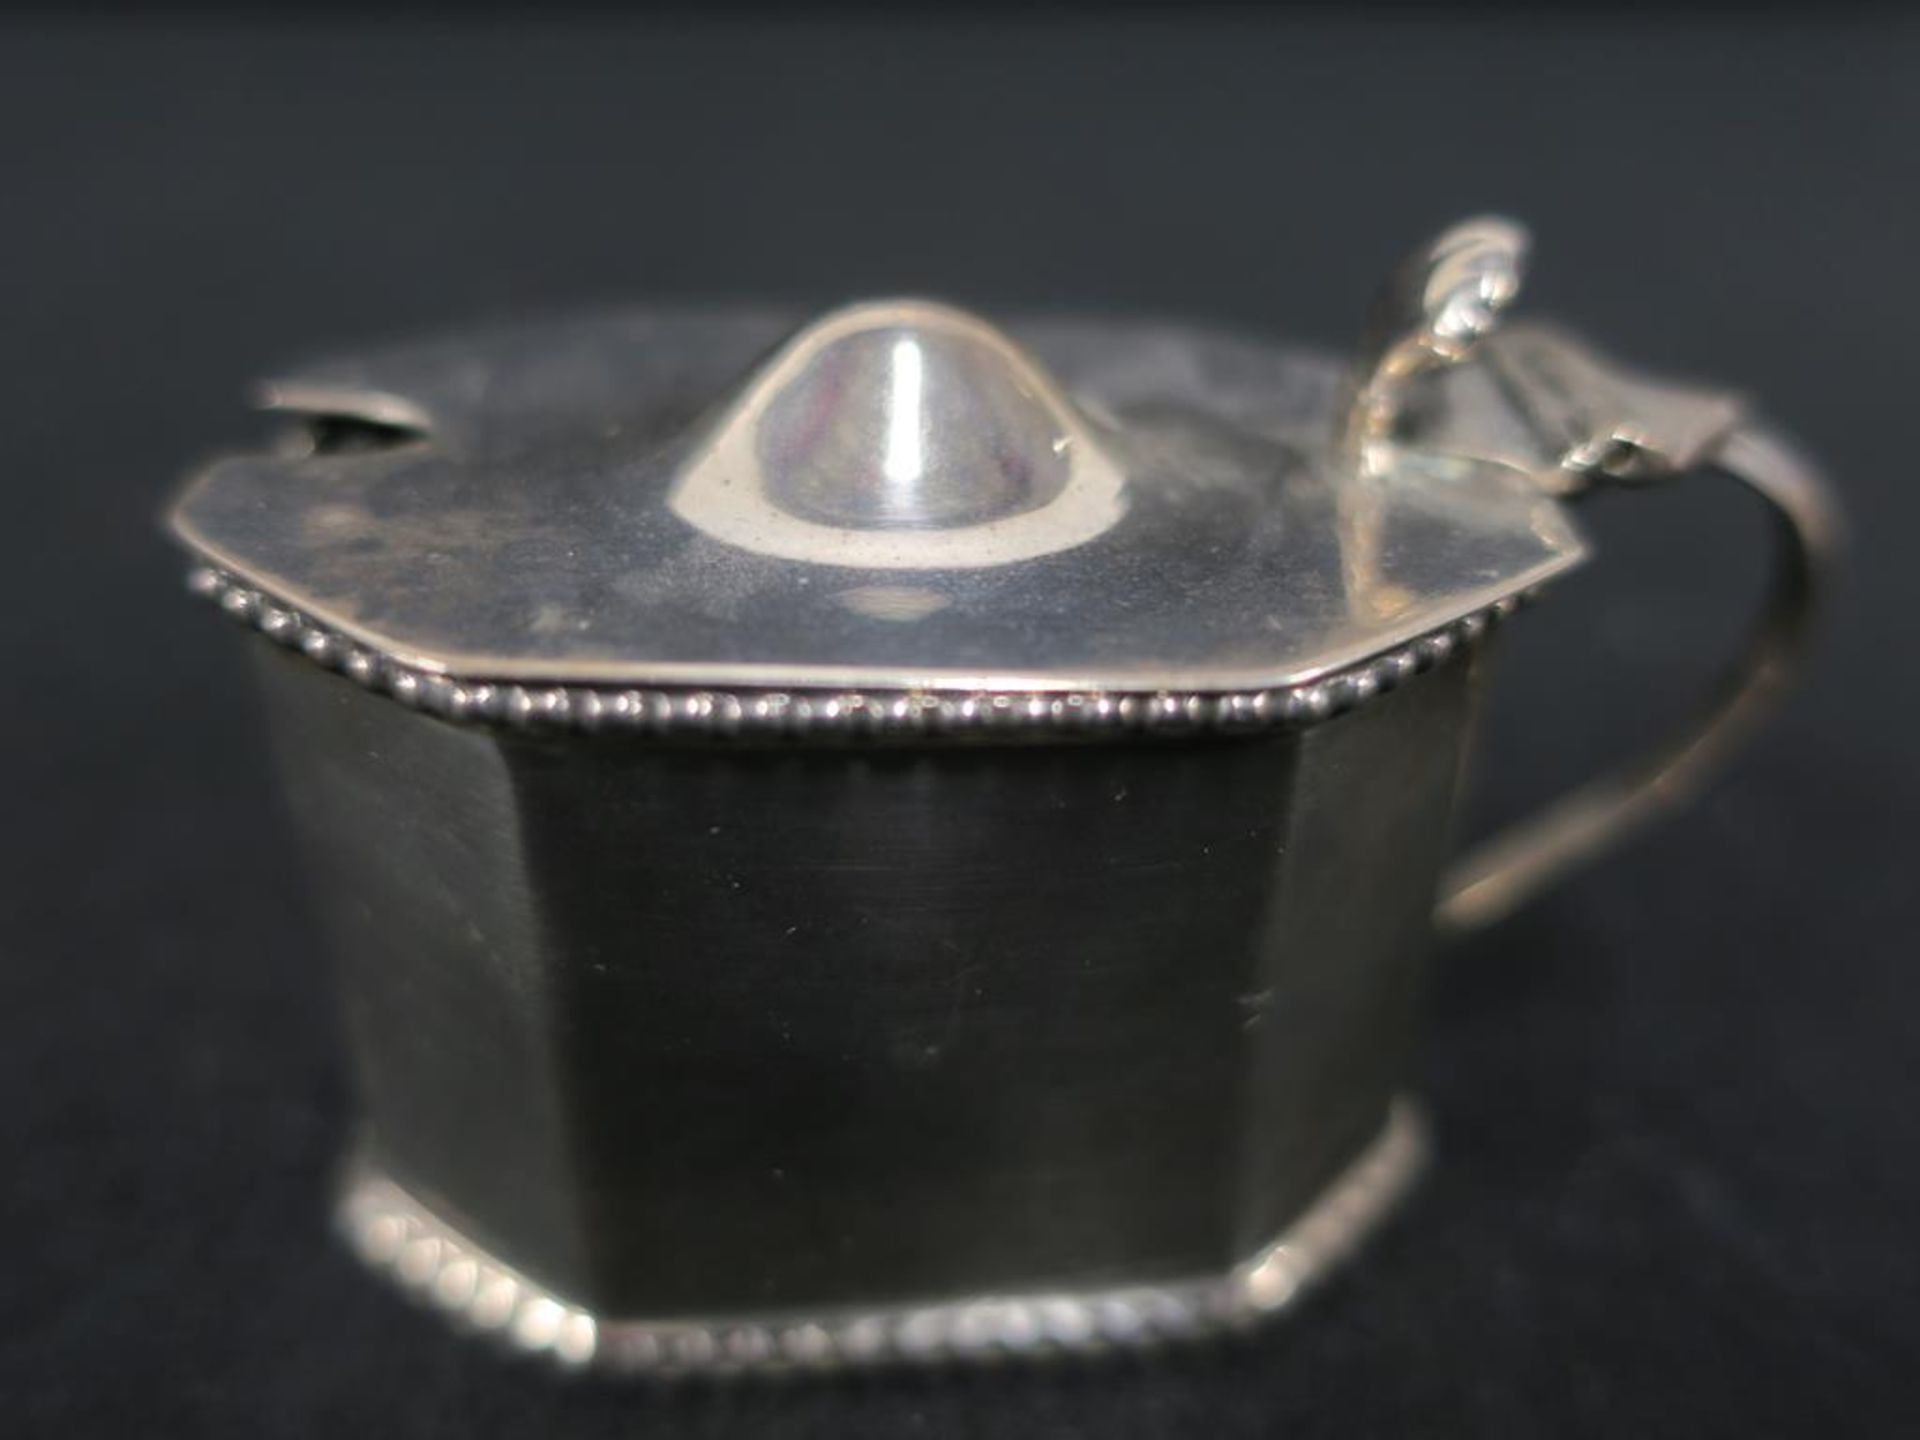 A Hallmarked Silver Salt or Condiment Pot with hinged lid and blue glass liner (est £20-£40)